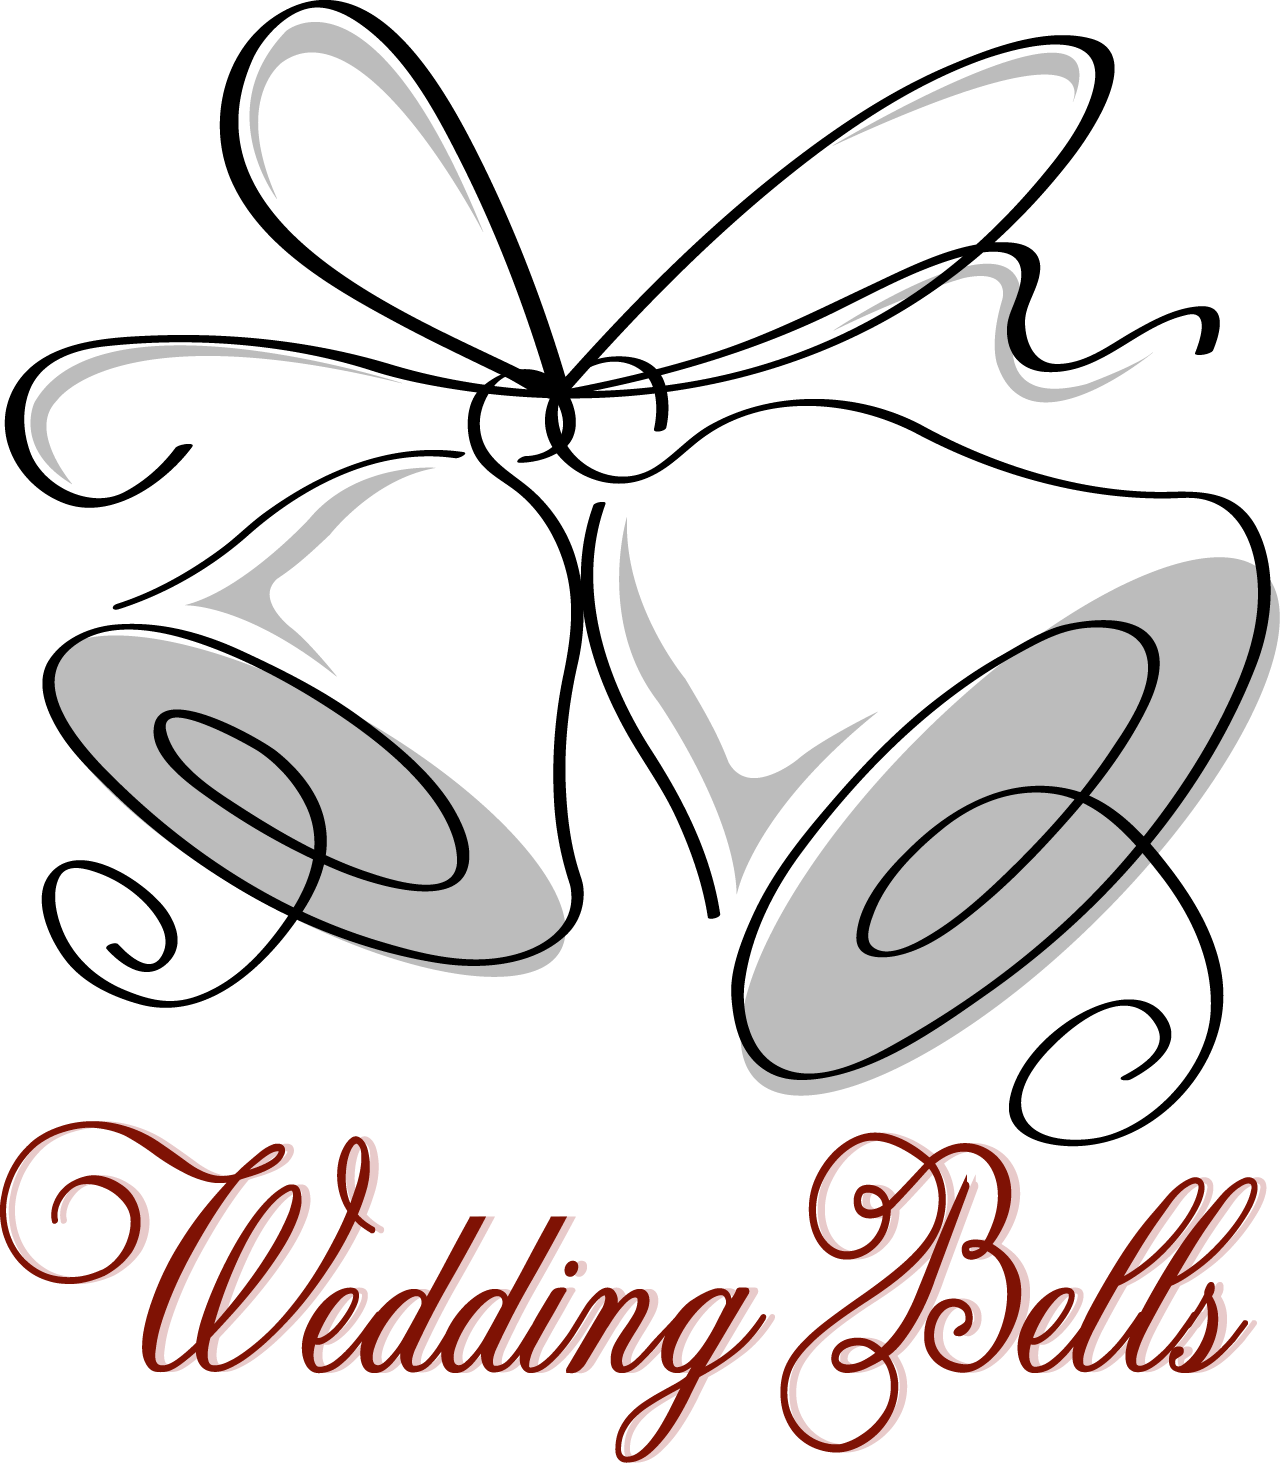 Wedding Bell Design Clipart Customizable – The Great India Shop